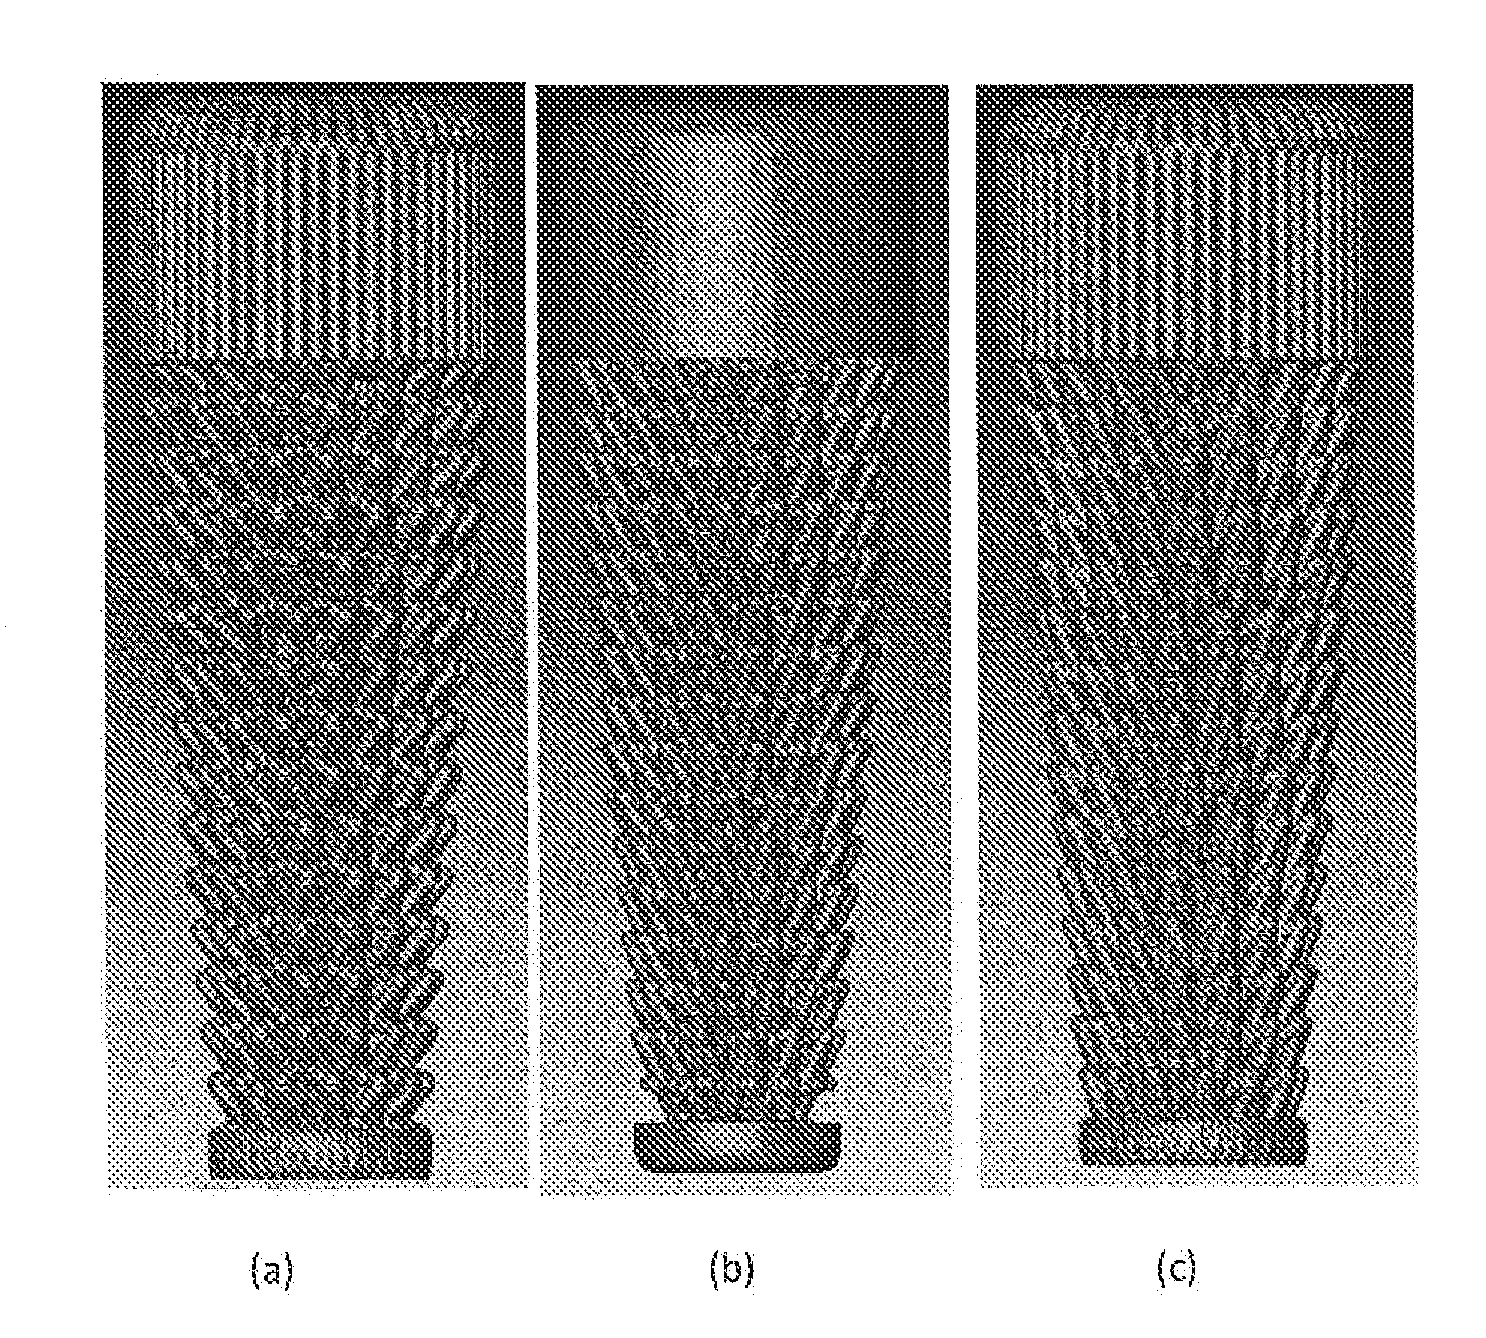 Surface modified unit cell lattice structures for optimized secure freeform fabrication